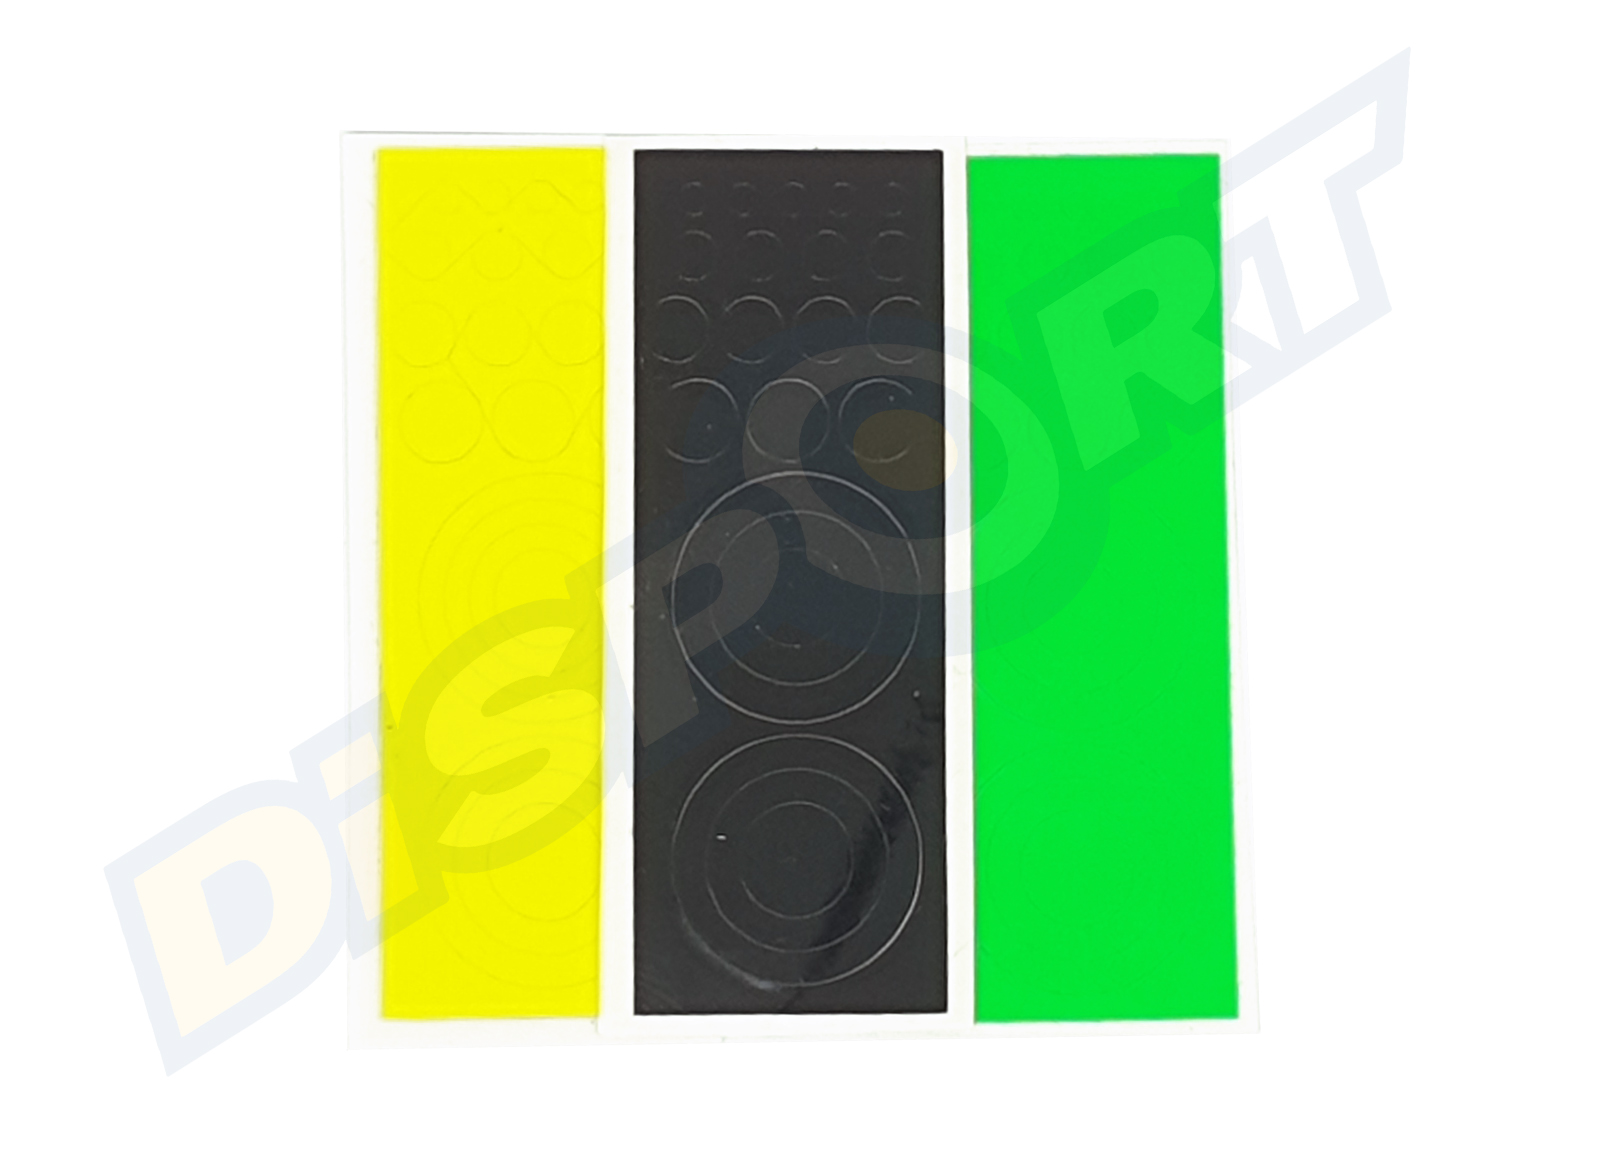 GAS PRO LENS DECALS KIT (1 BLACK, 1 FLUO GREEN, 1 FLUO YELLOW)